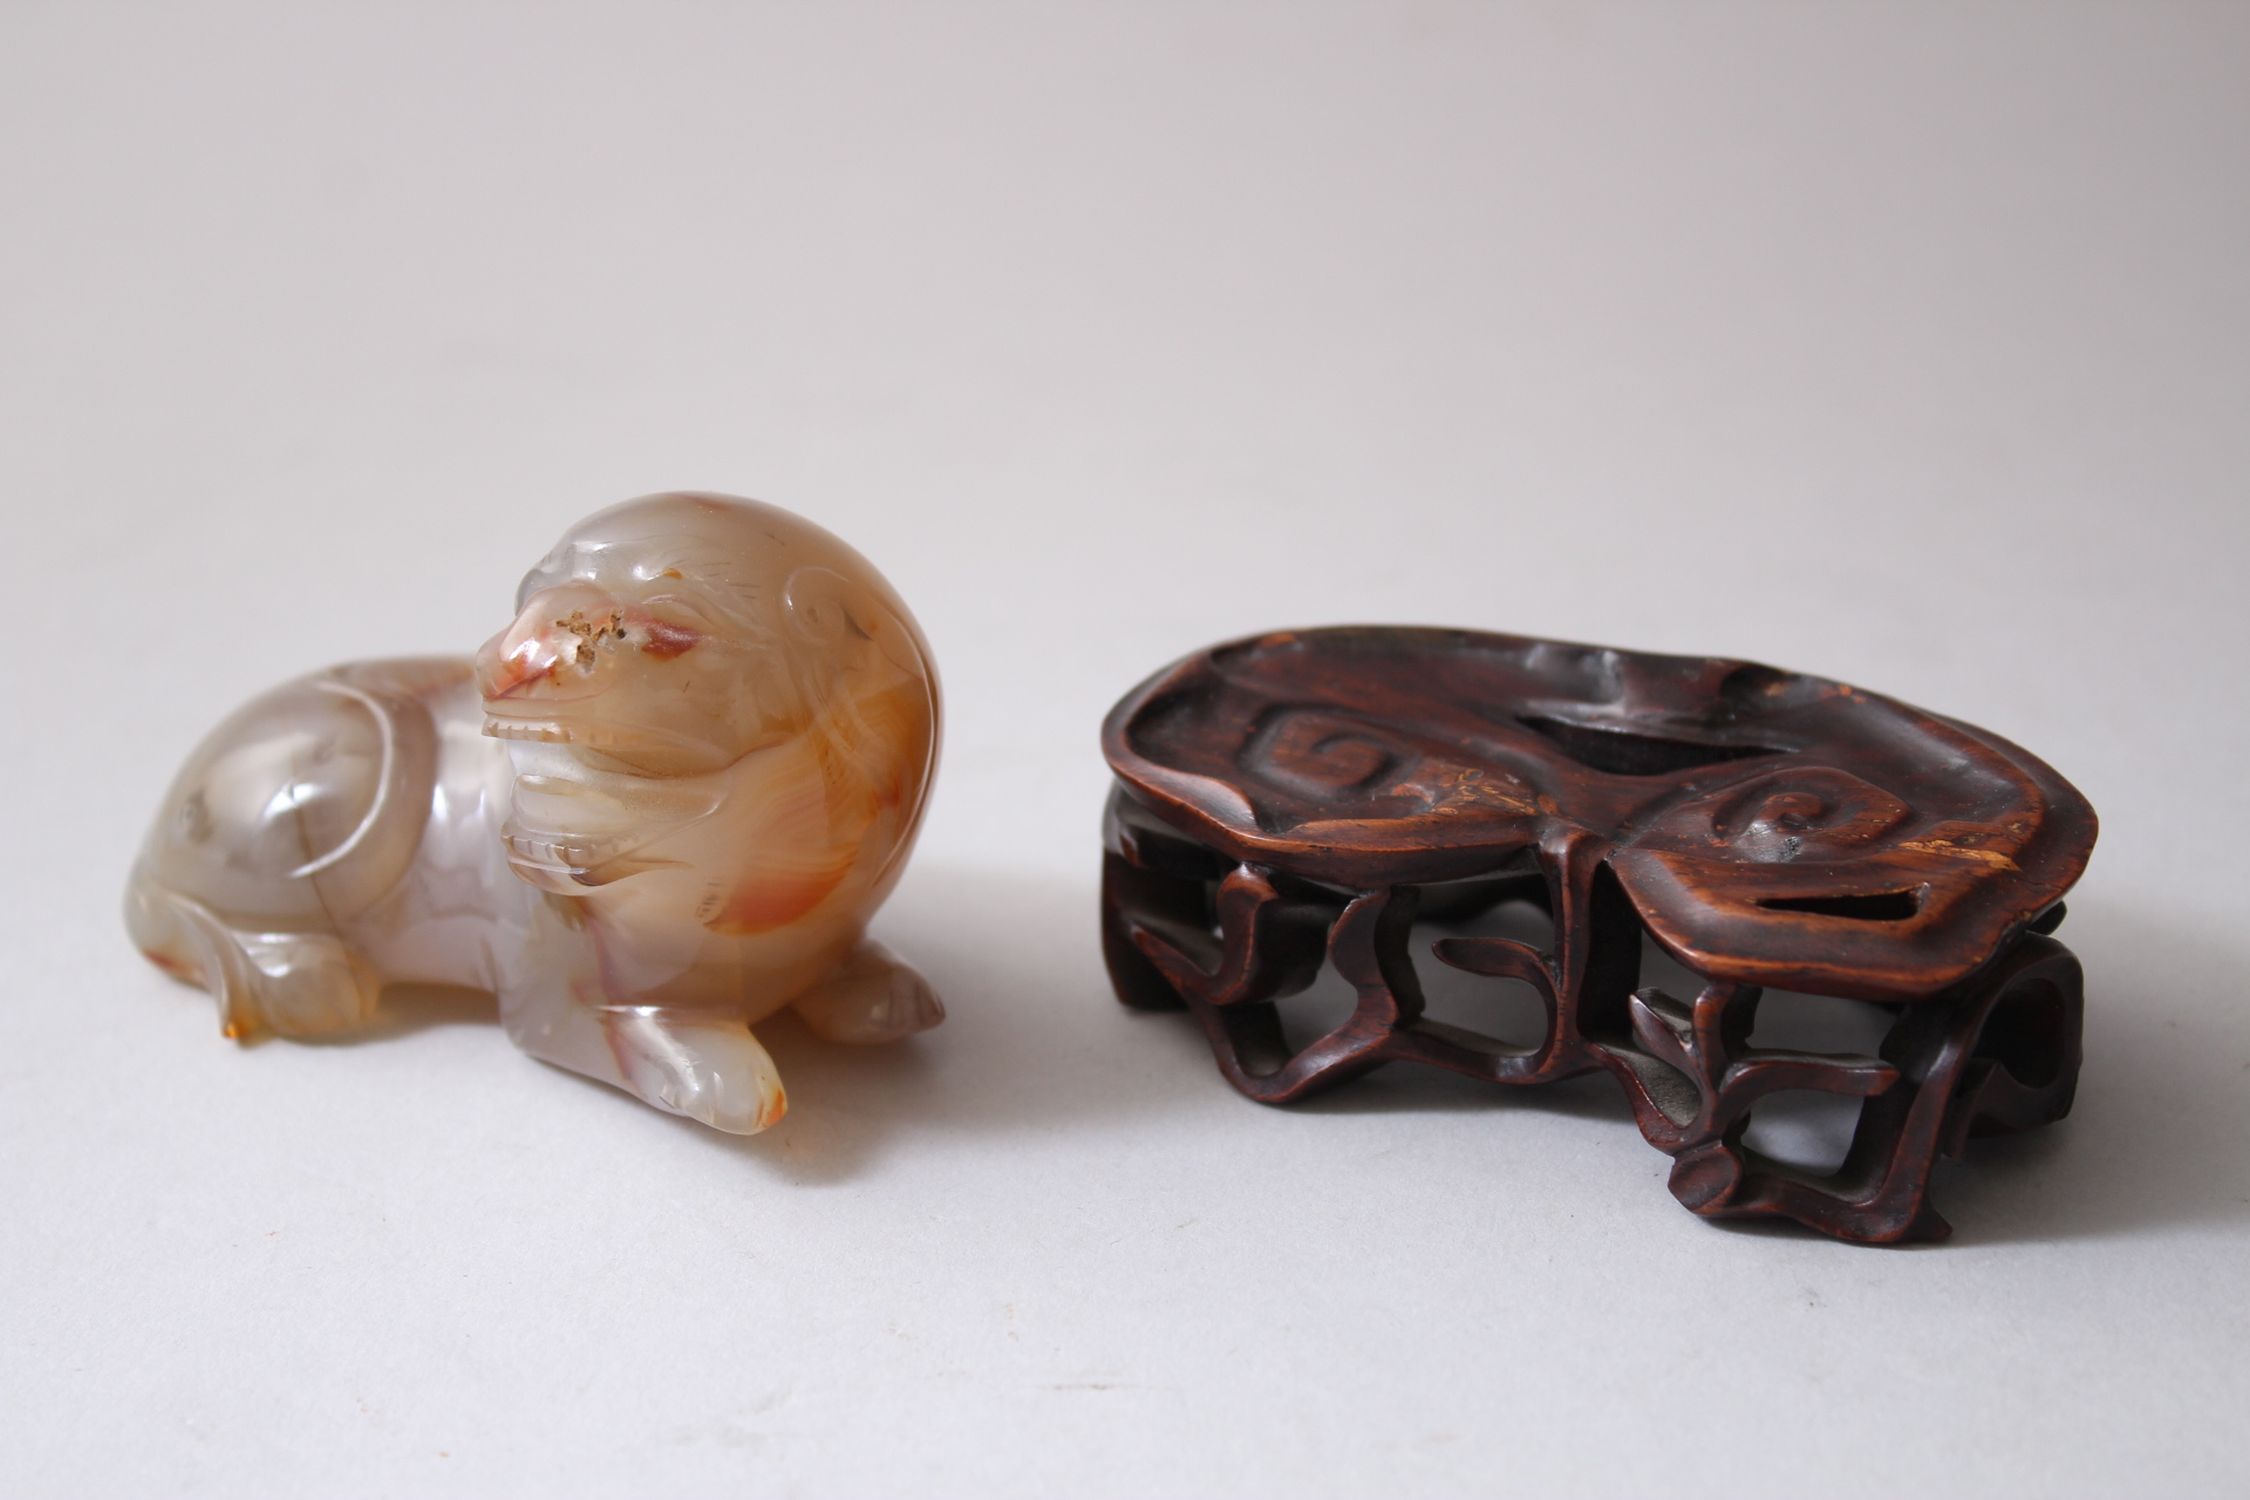 A 19TH CENTURY CHINESE AGATE CARVED FIGURE OF A DOG & HARDWOOD STAND, the agate dog measures 5cm - Image 3 of 3